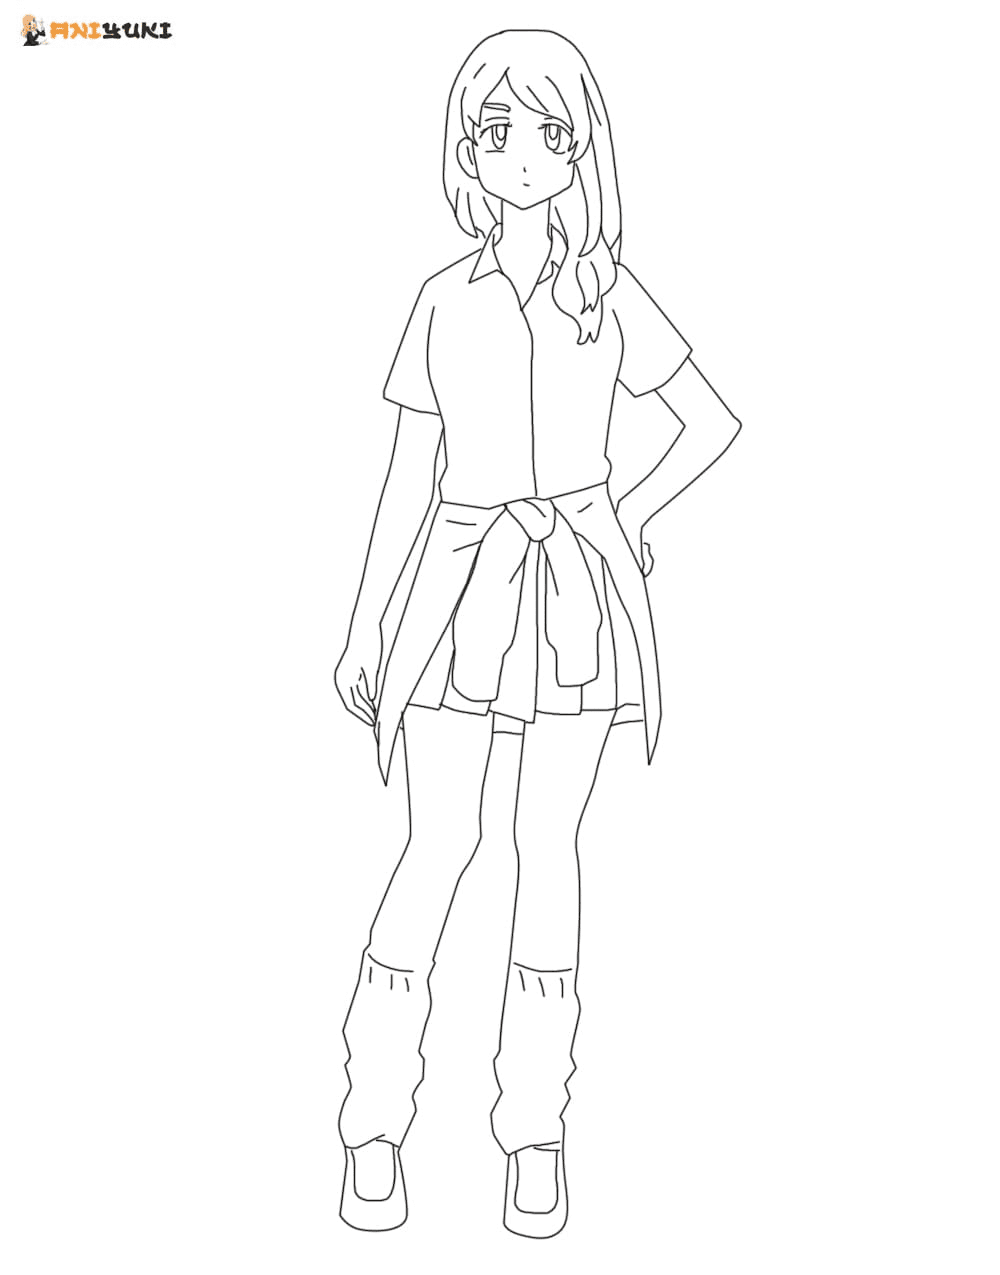 Emma Sano Coloring Pages